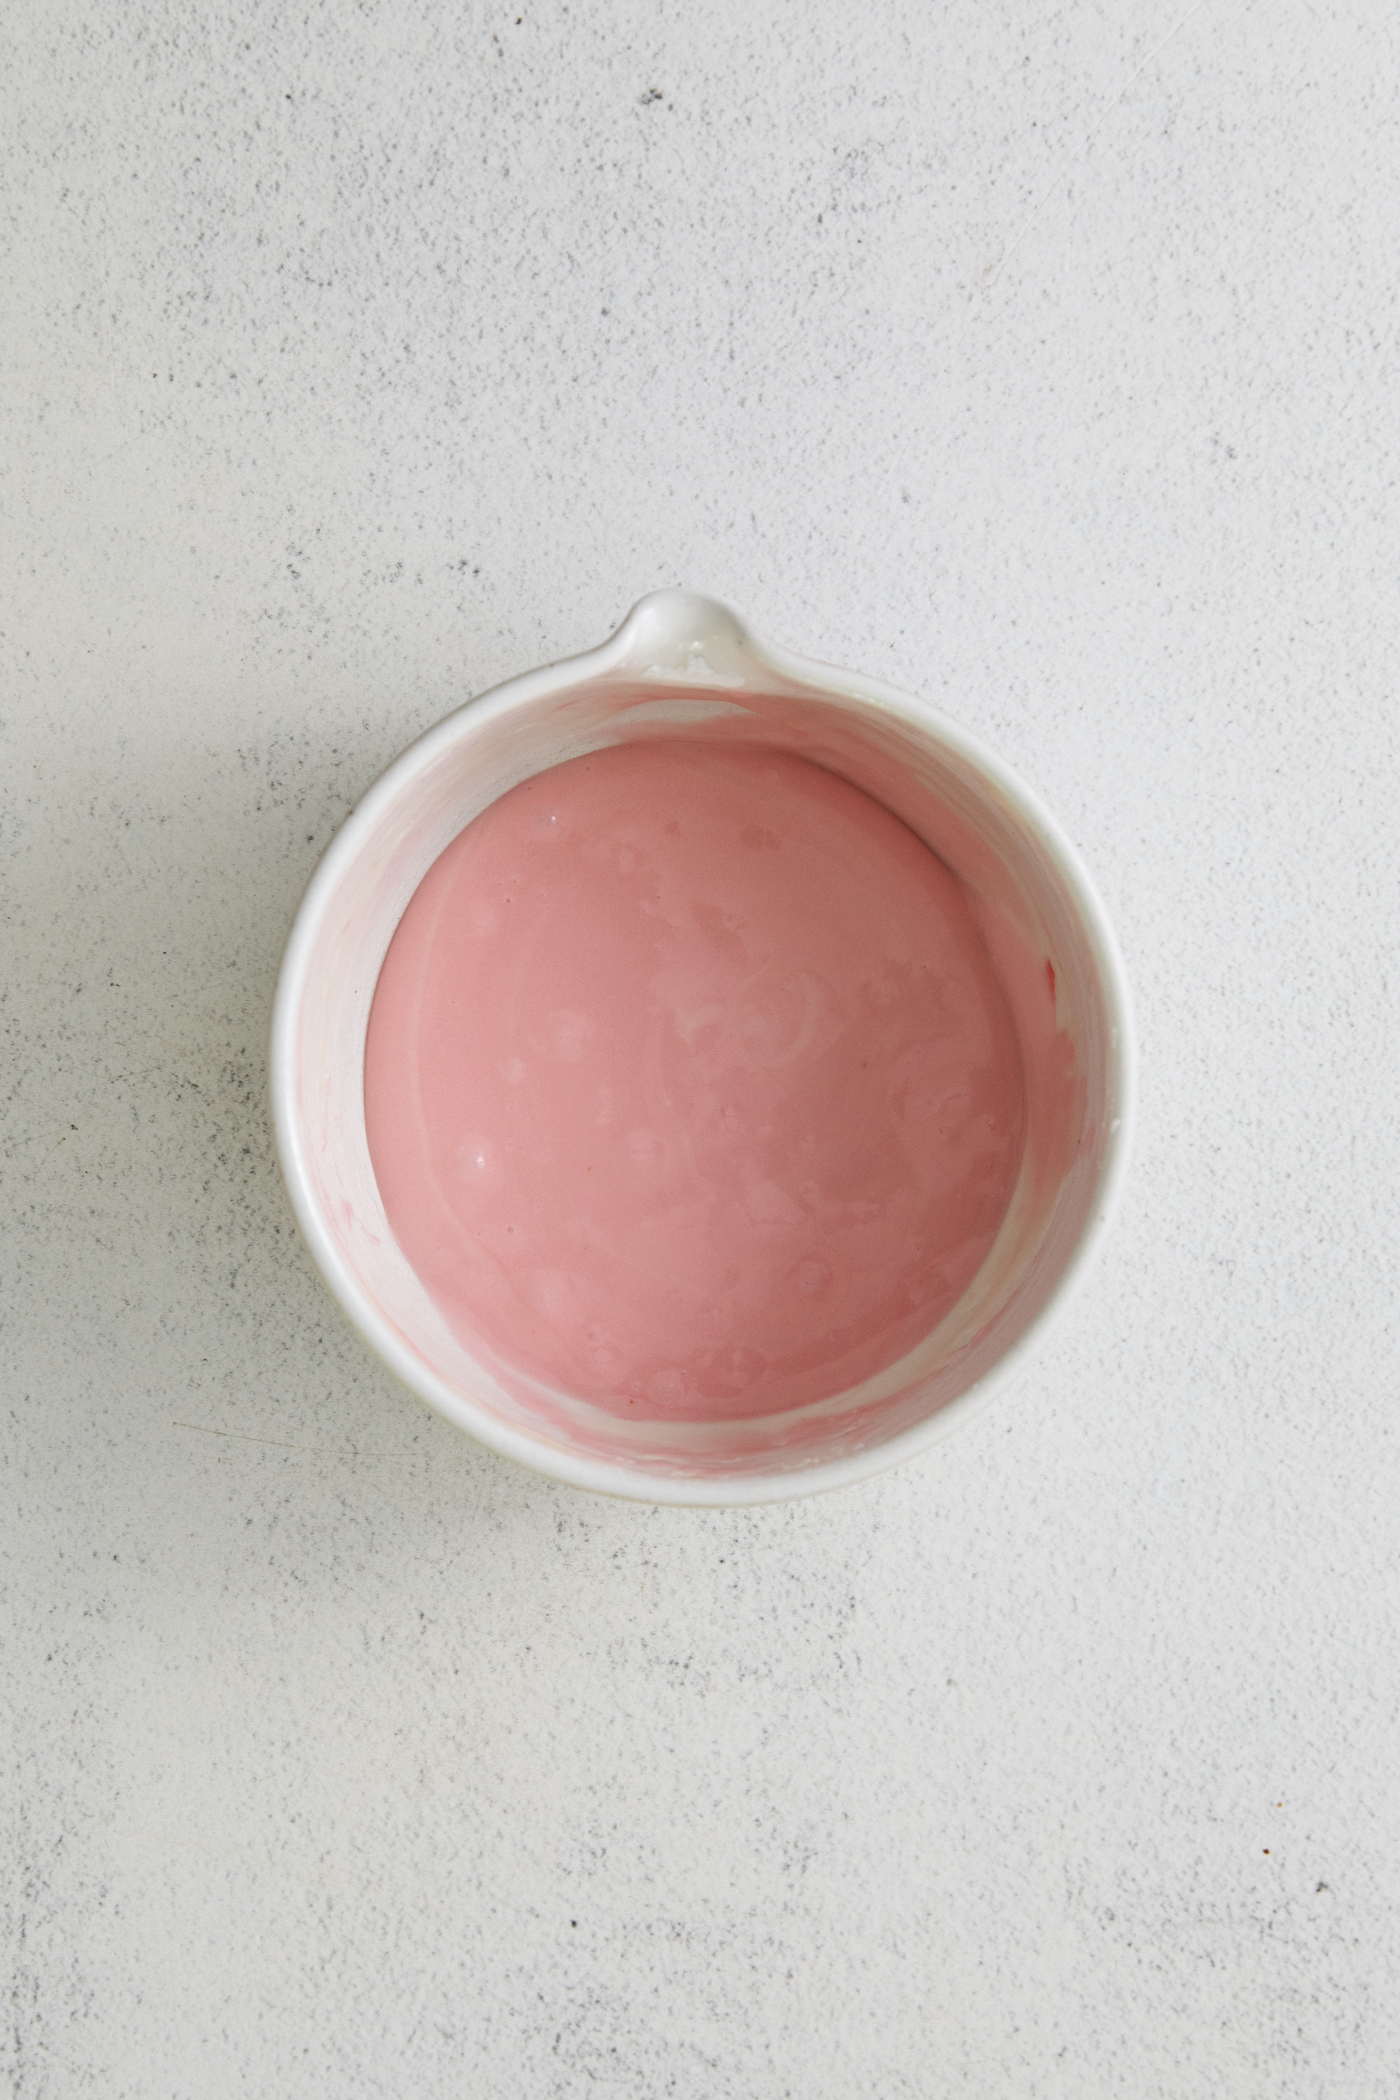 Homemade pink frosting in a bowl